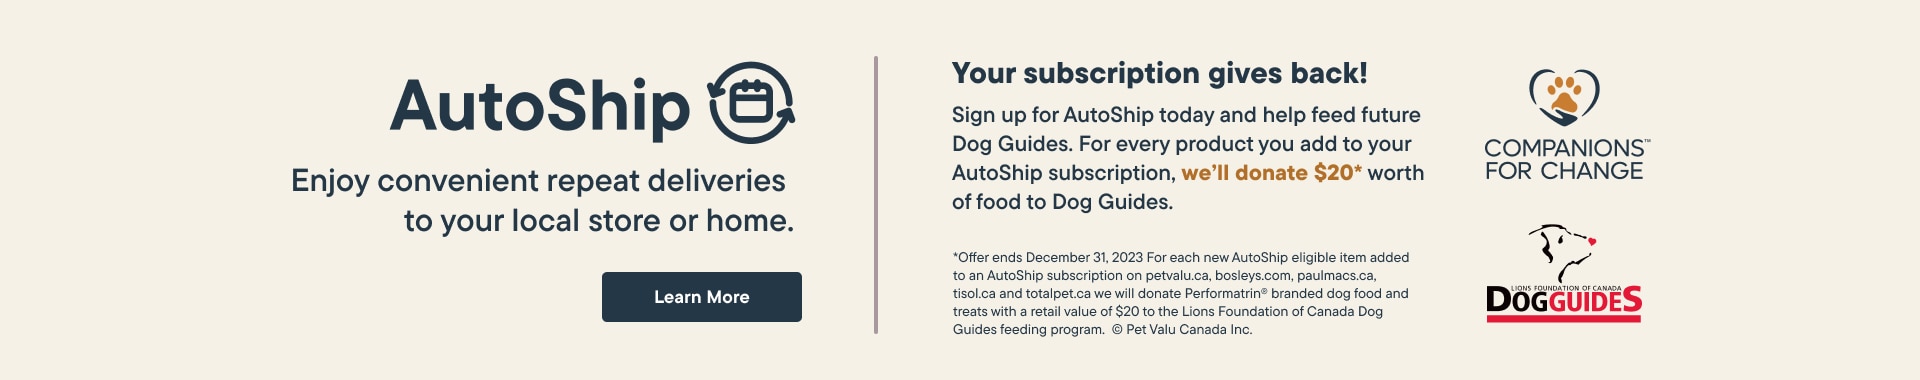 AutoShip to your store or home. Your subscription gives back.